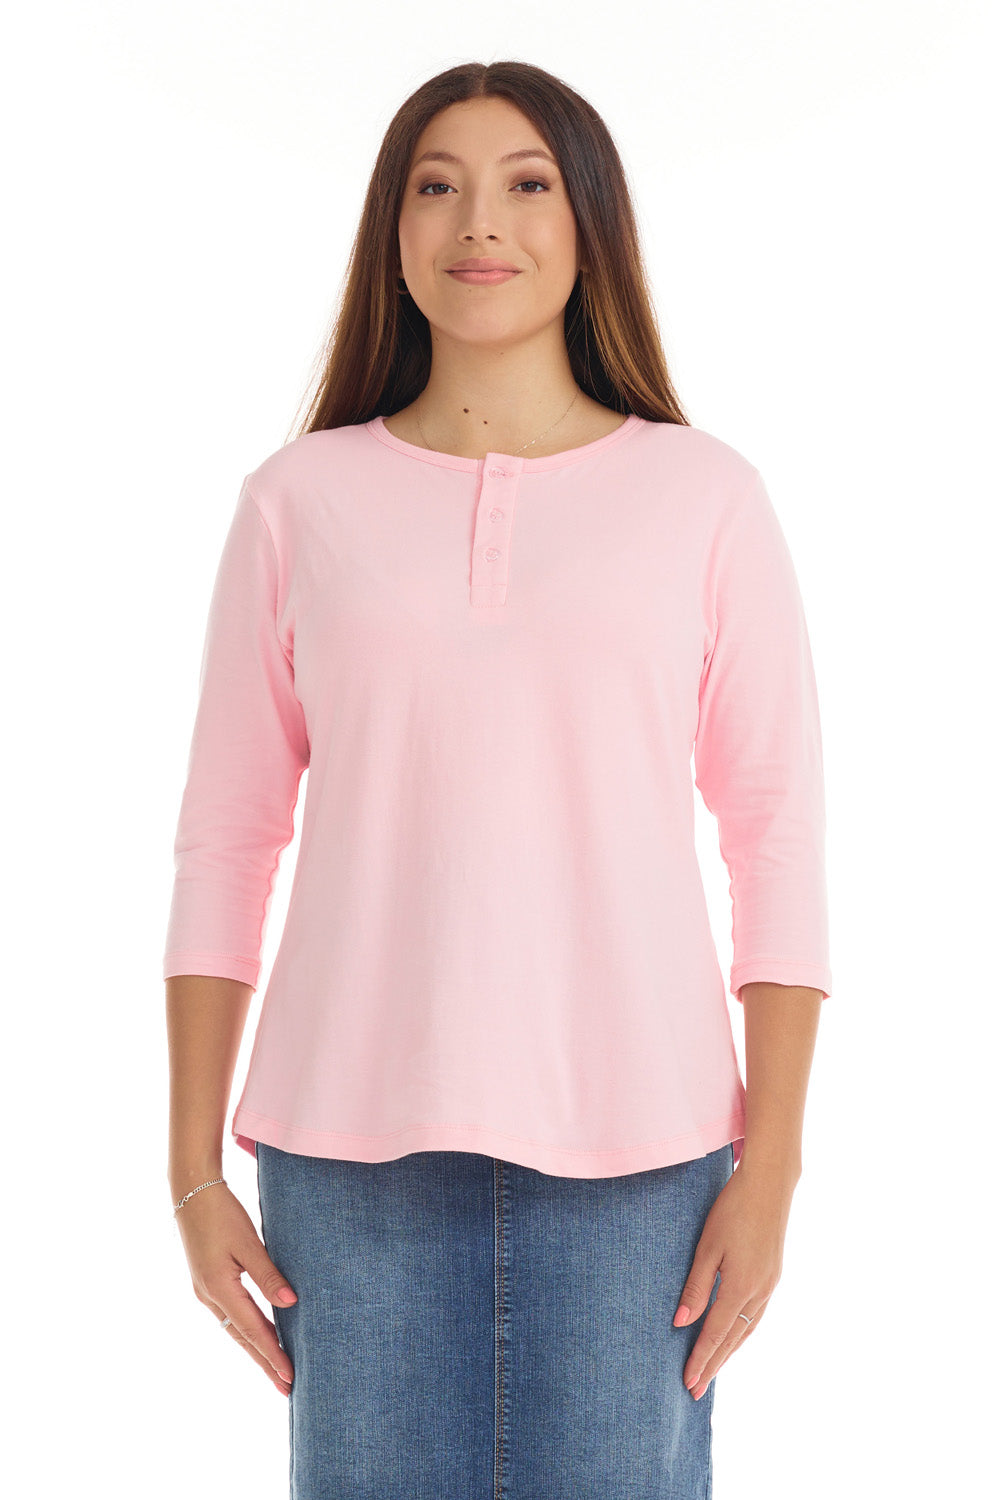 pink 3/4 sleeve cotton loose top to wear with jeans